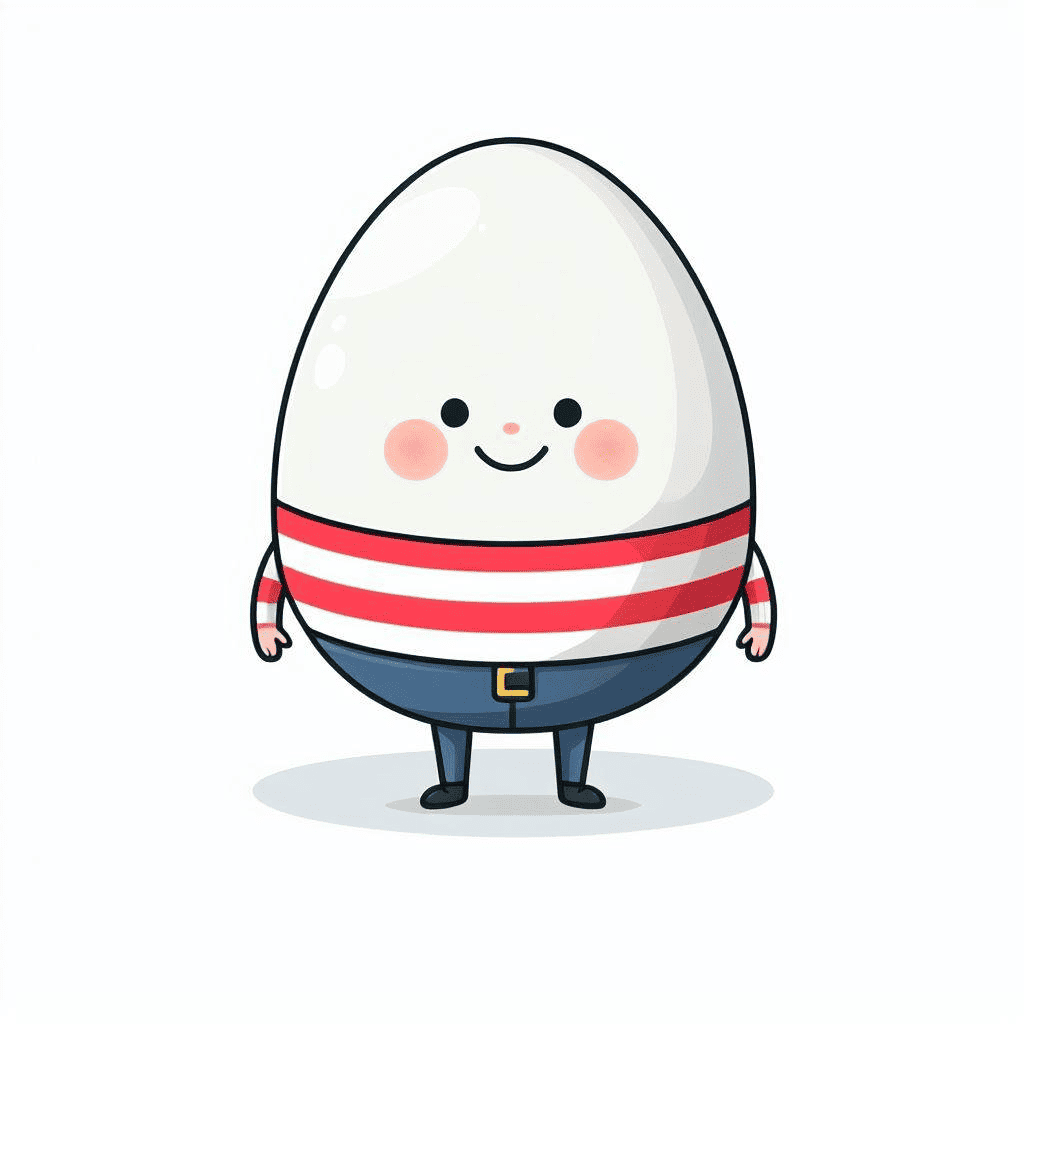 Clipart of Humpty Dumpty Images